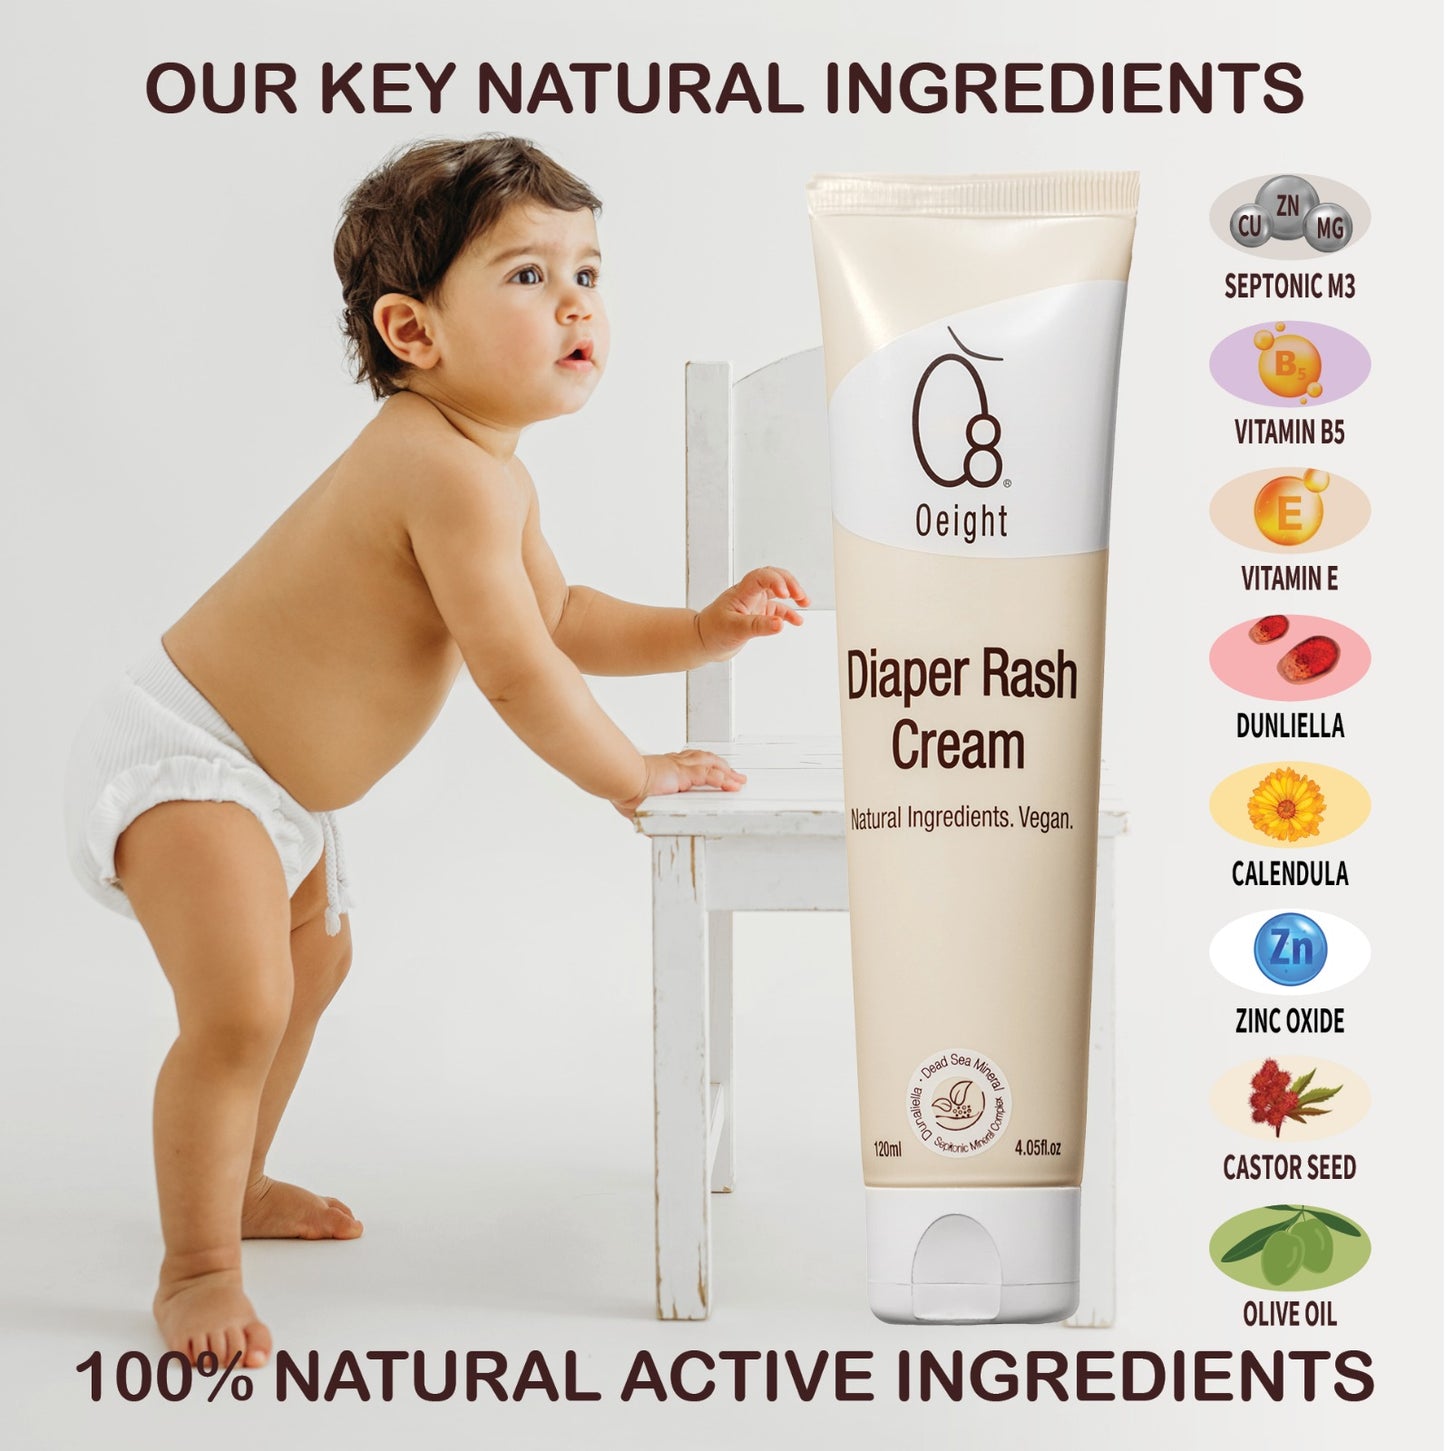 Oeight Diaper Rash Cream, 100% natural active ingredients enriched with zinc, calendula, olive oil, castor seed oil and pro-vitamin B5. Helps prevent Diaper rash and skin irritation.